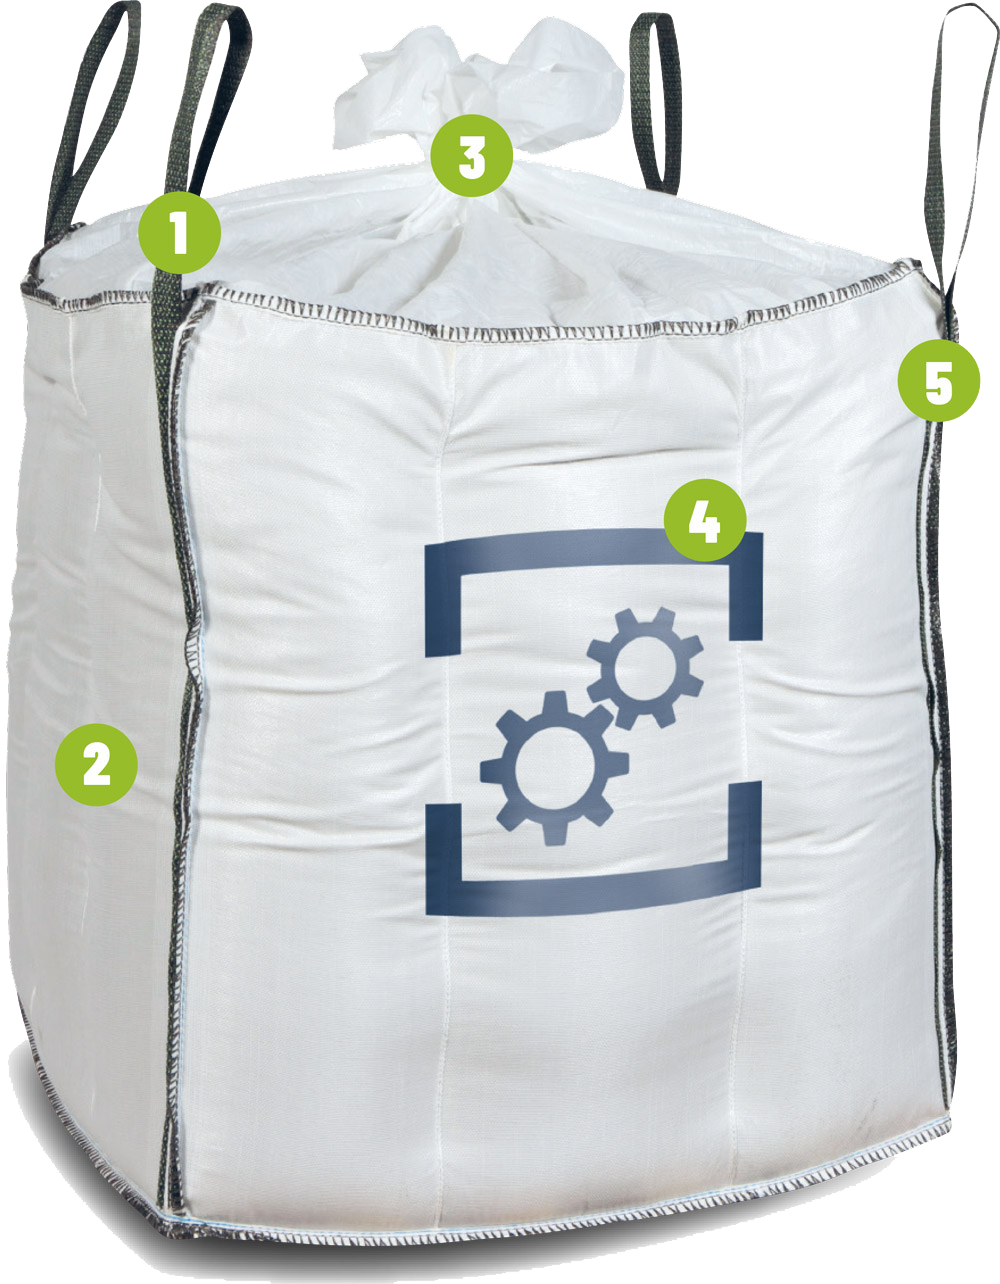 Baobag is the leading distributor of big bags! Standardized or customized  products adapted to clients´requirements. Our big bags comply with the  norms NF EN ISO 21898 and NF EN IEC 61340-4-4 as